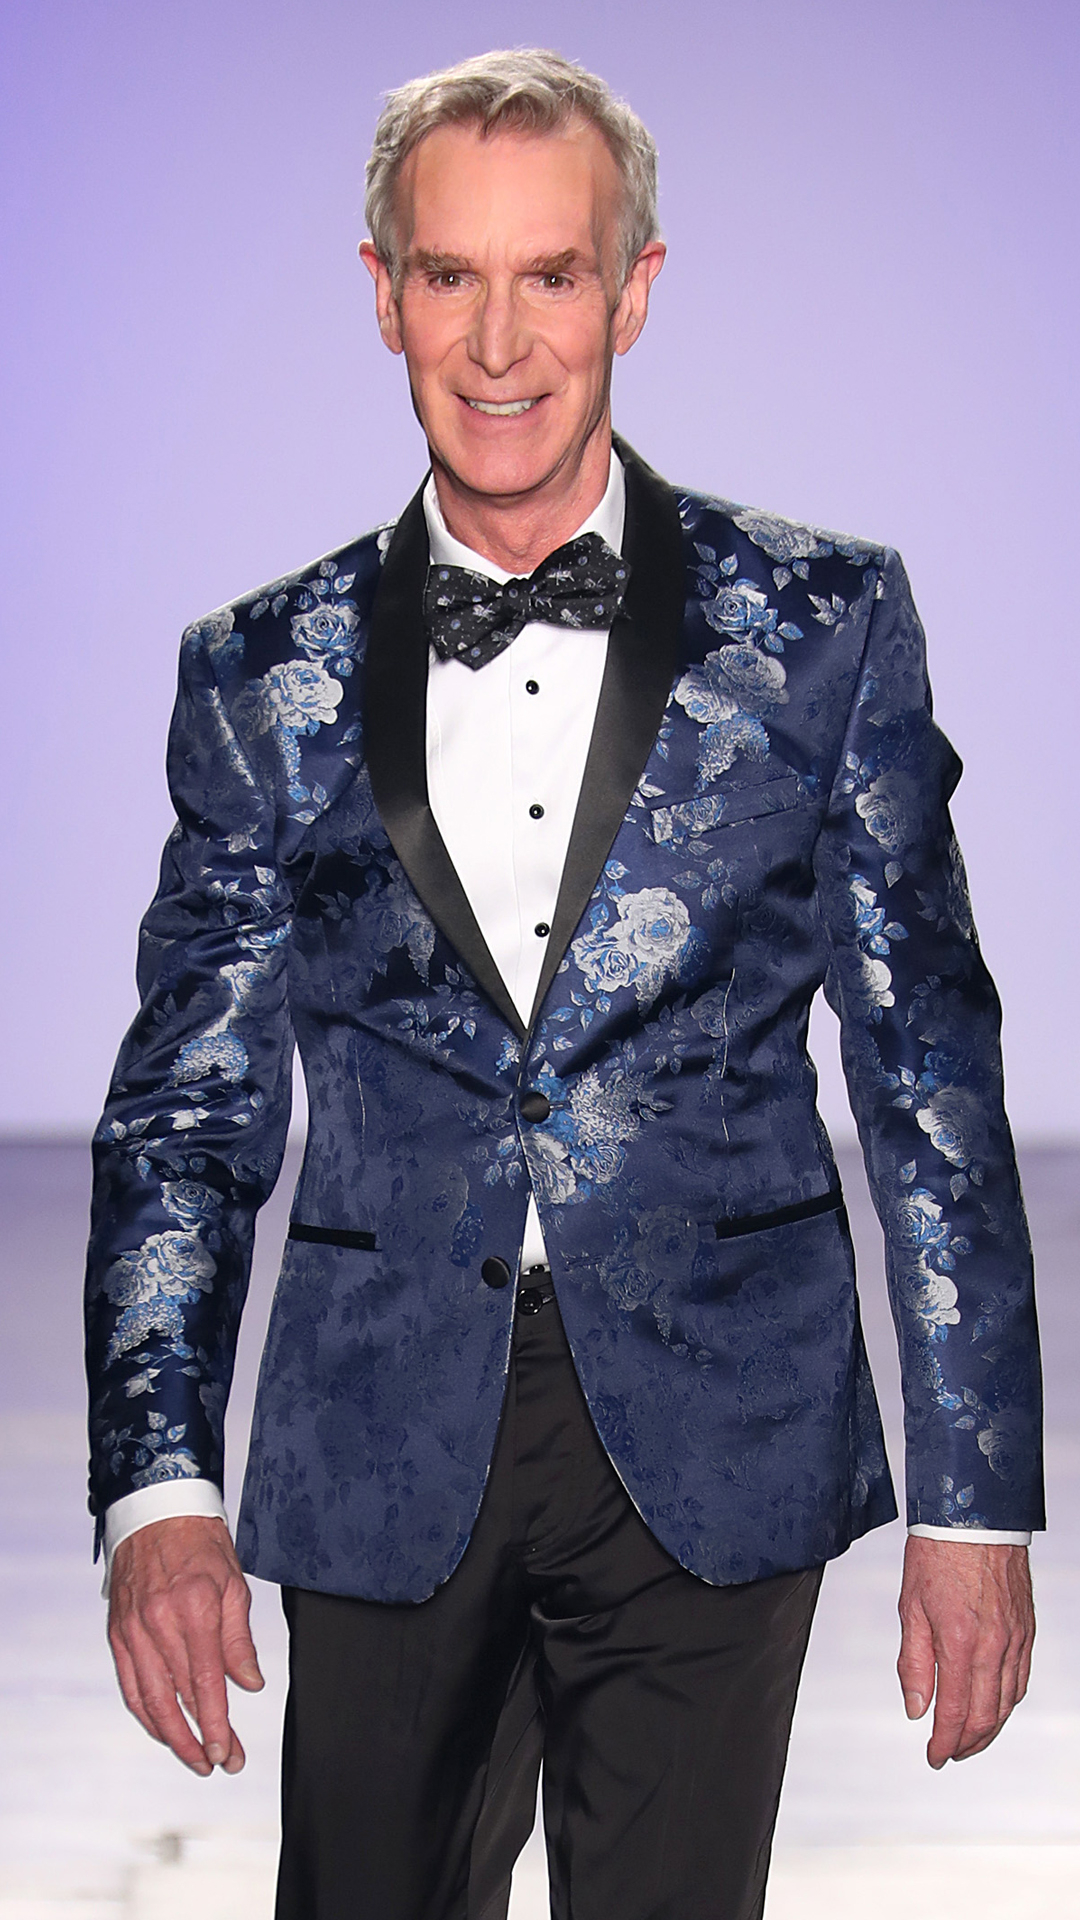 Image result for bill nye the science guy new york fashion week 2020